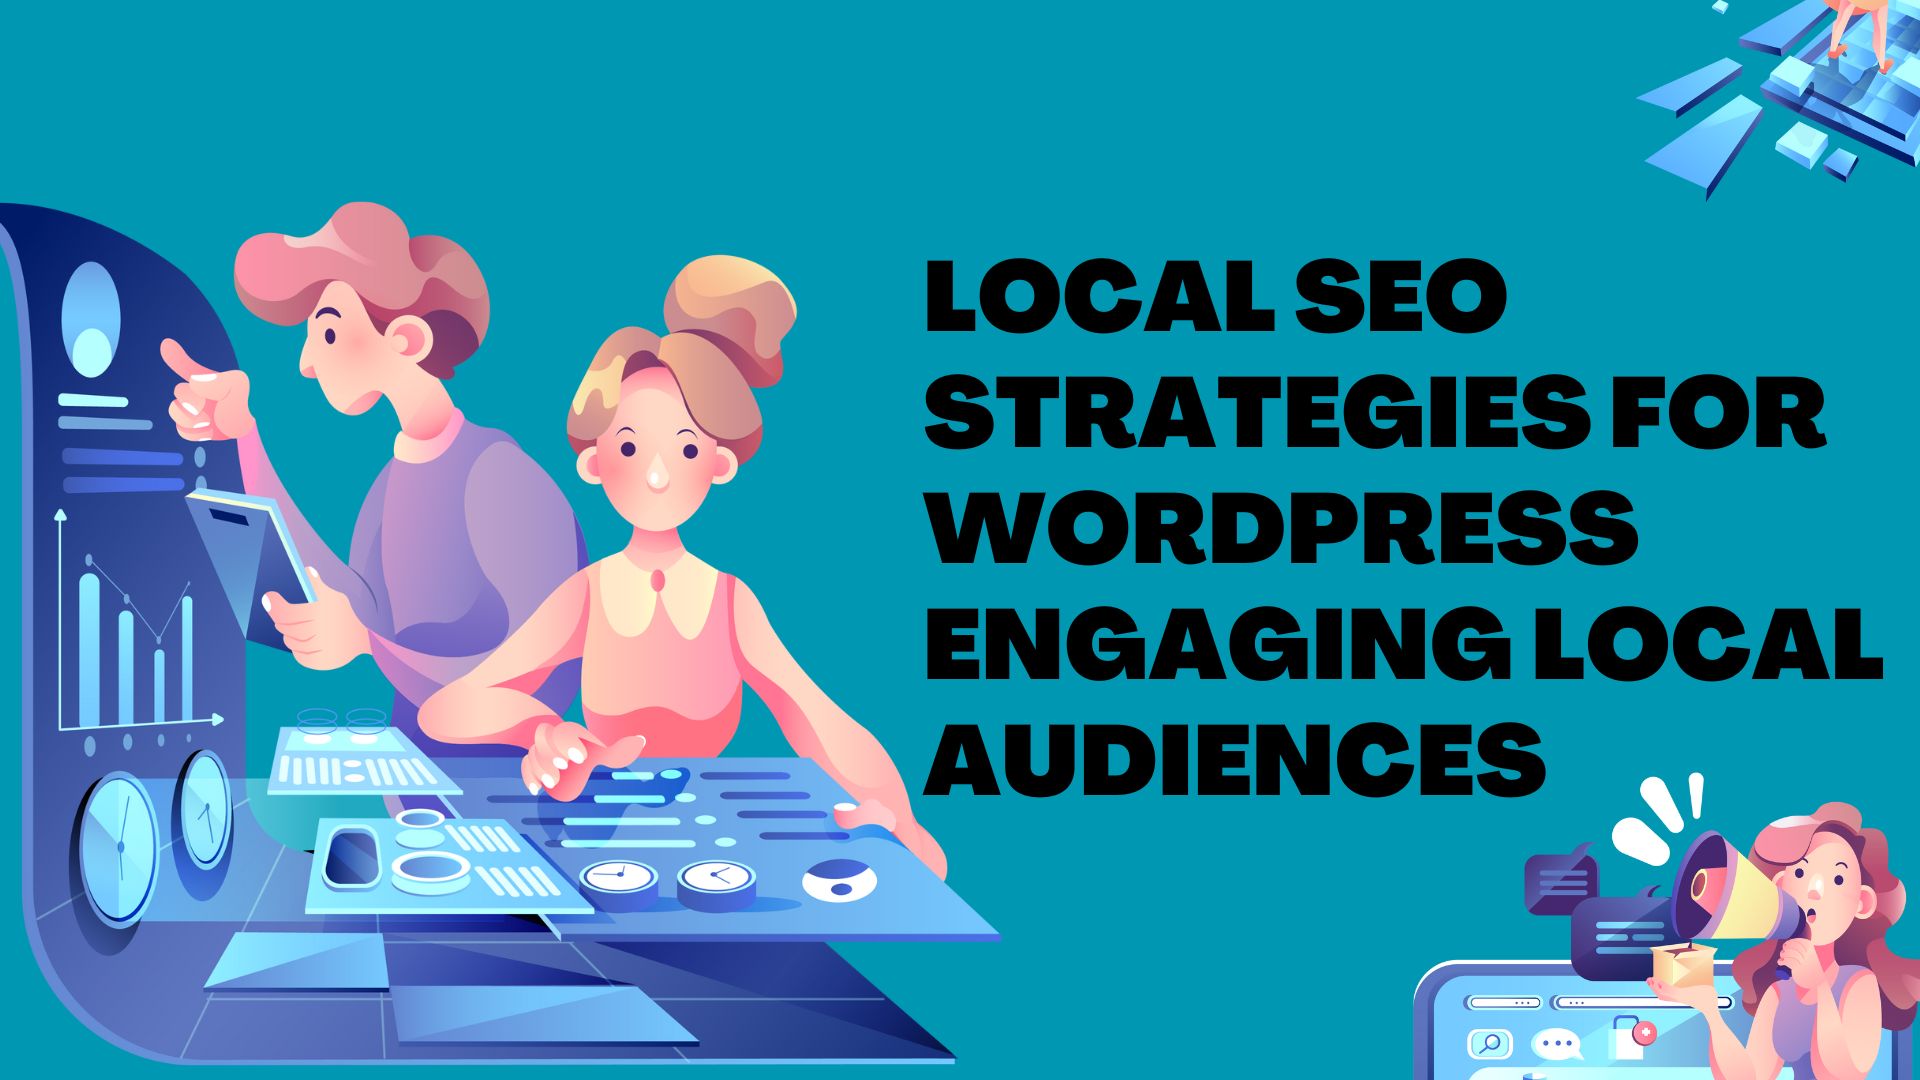 Local SEO Strategies for WordPress - Engaging Local Audiences